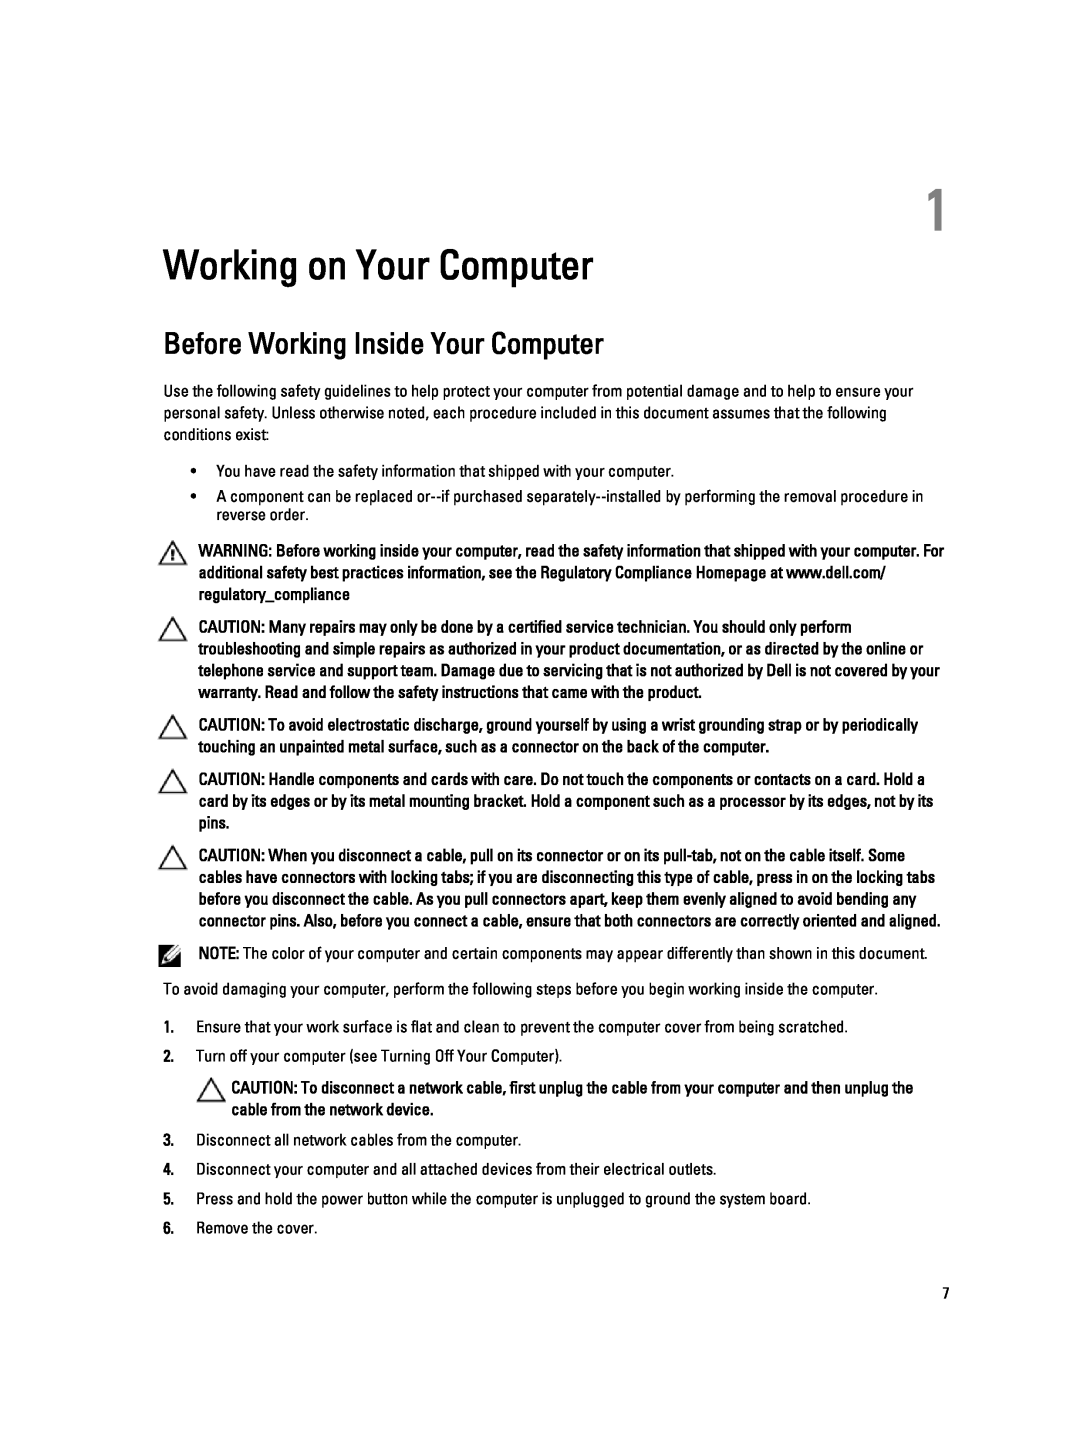 Dell 6430U owner manual Working on Your Computer, Before Working Inside Your Computer 